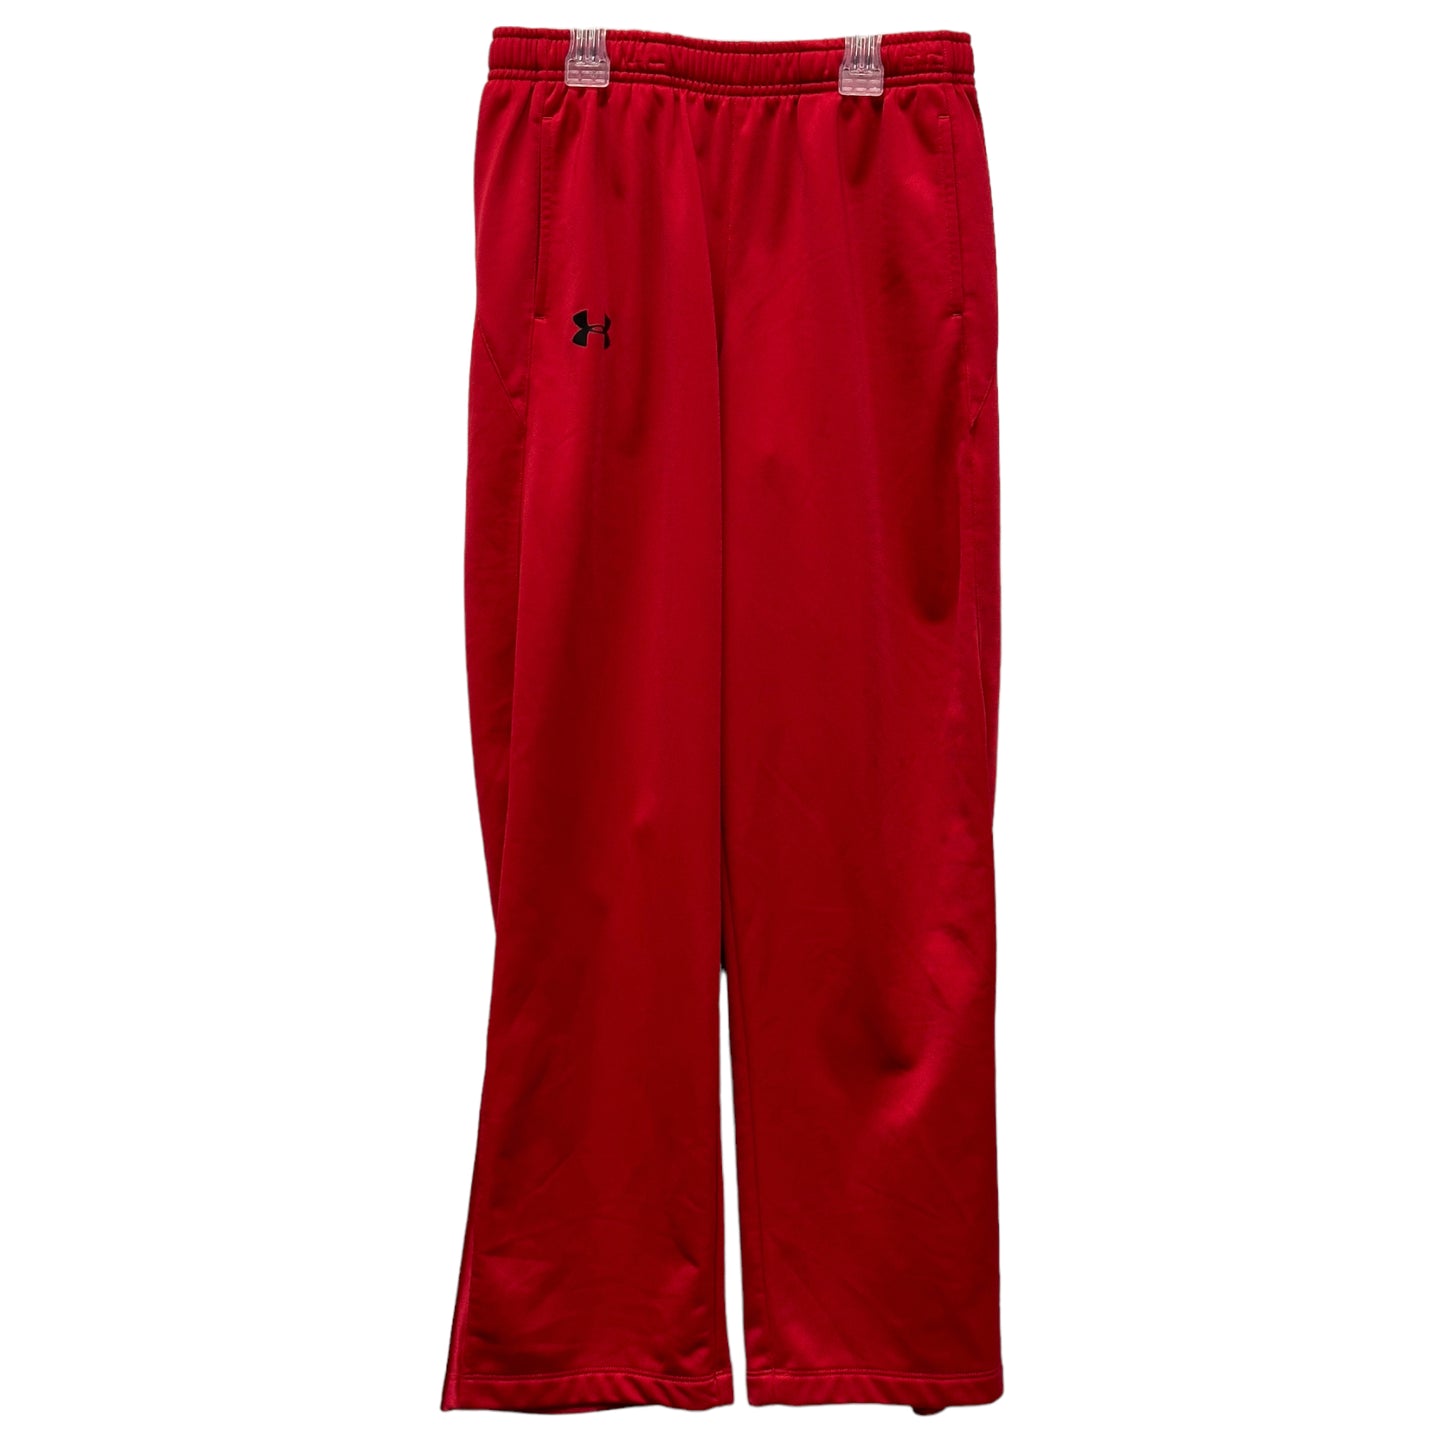 Under Armour YLG Pants